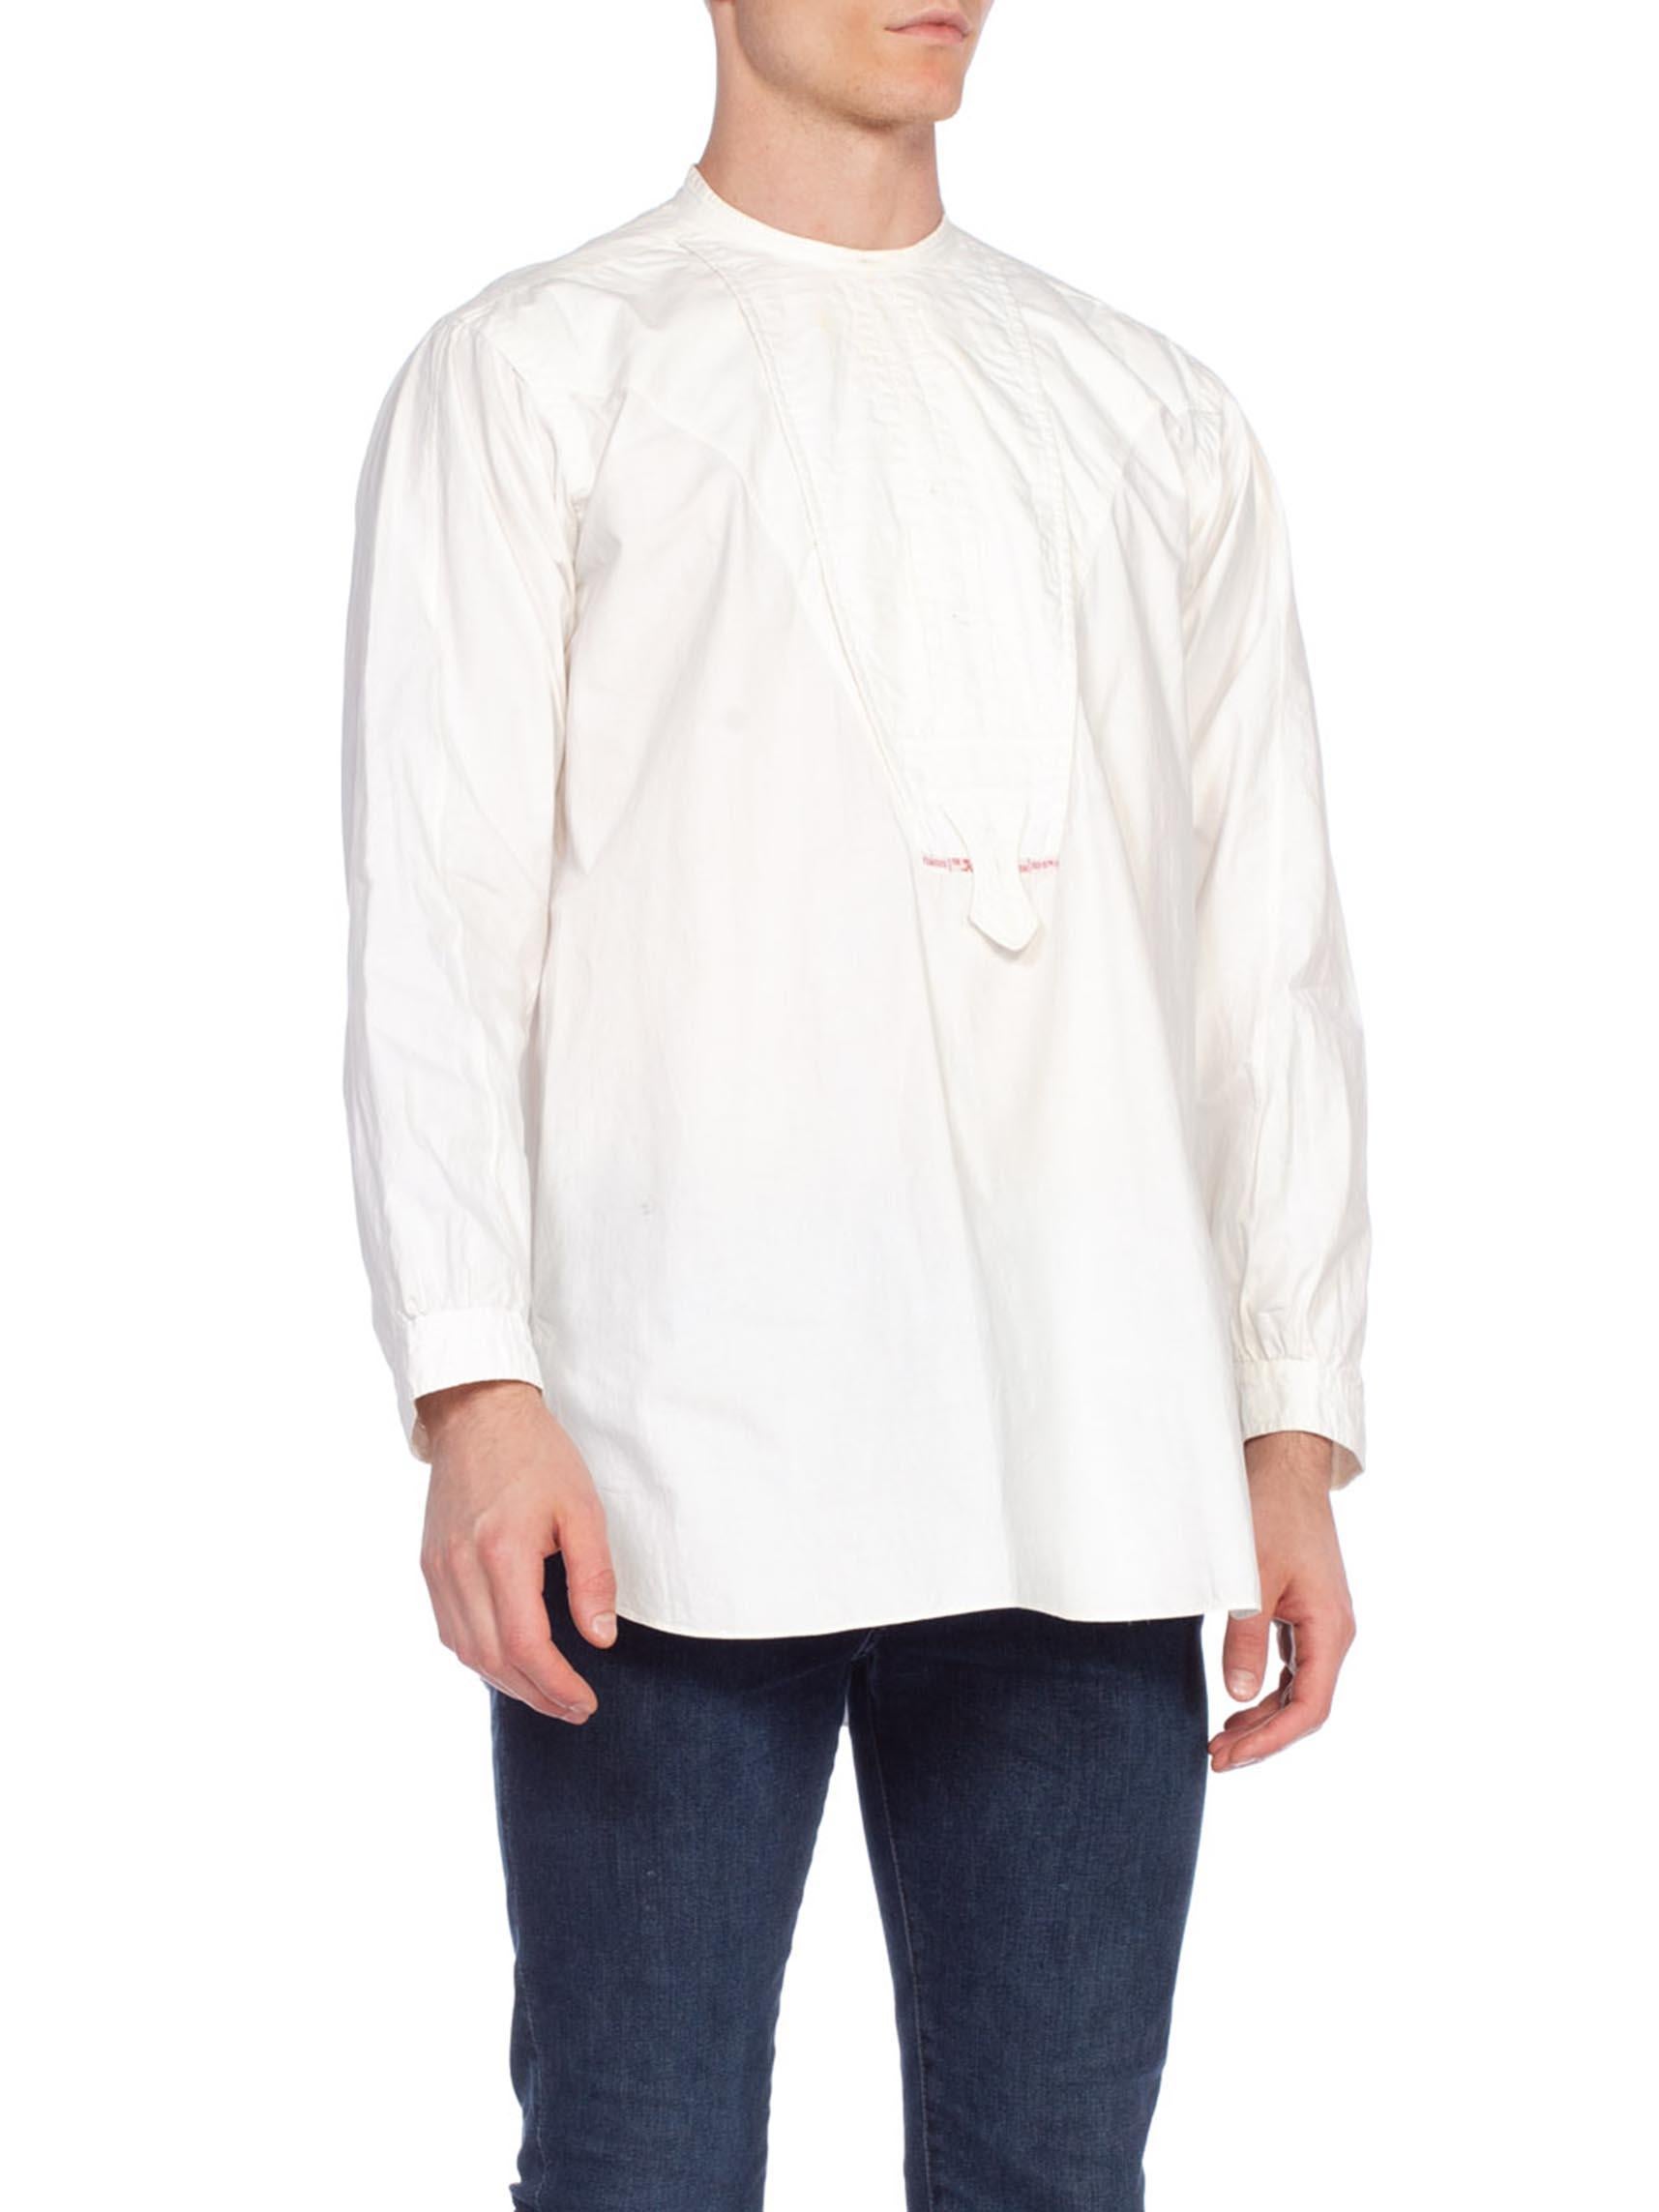 Victorian White Organic Cotton Men's Antique Bib Front Shirt Dated 1880 In Excellent Condition For Sale In New York, NY